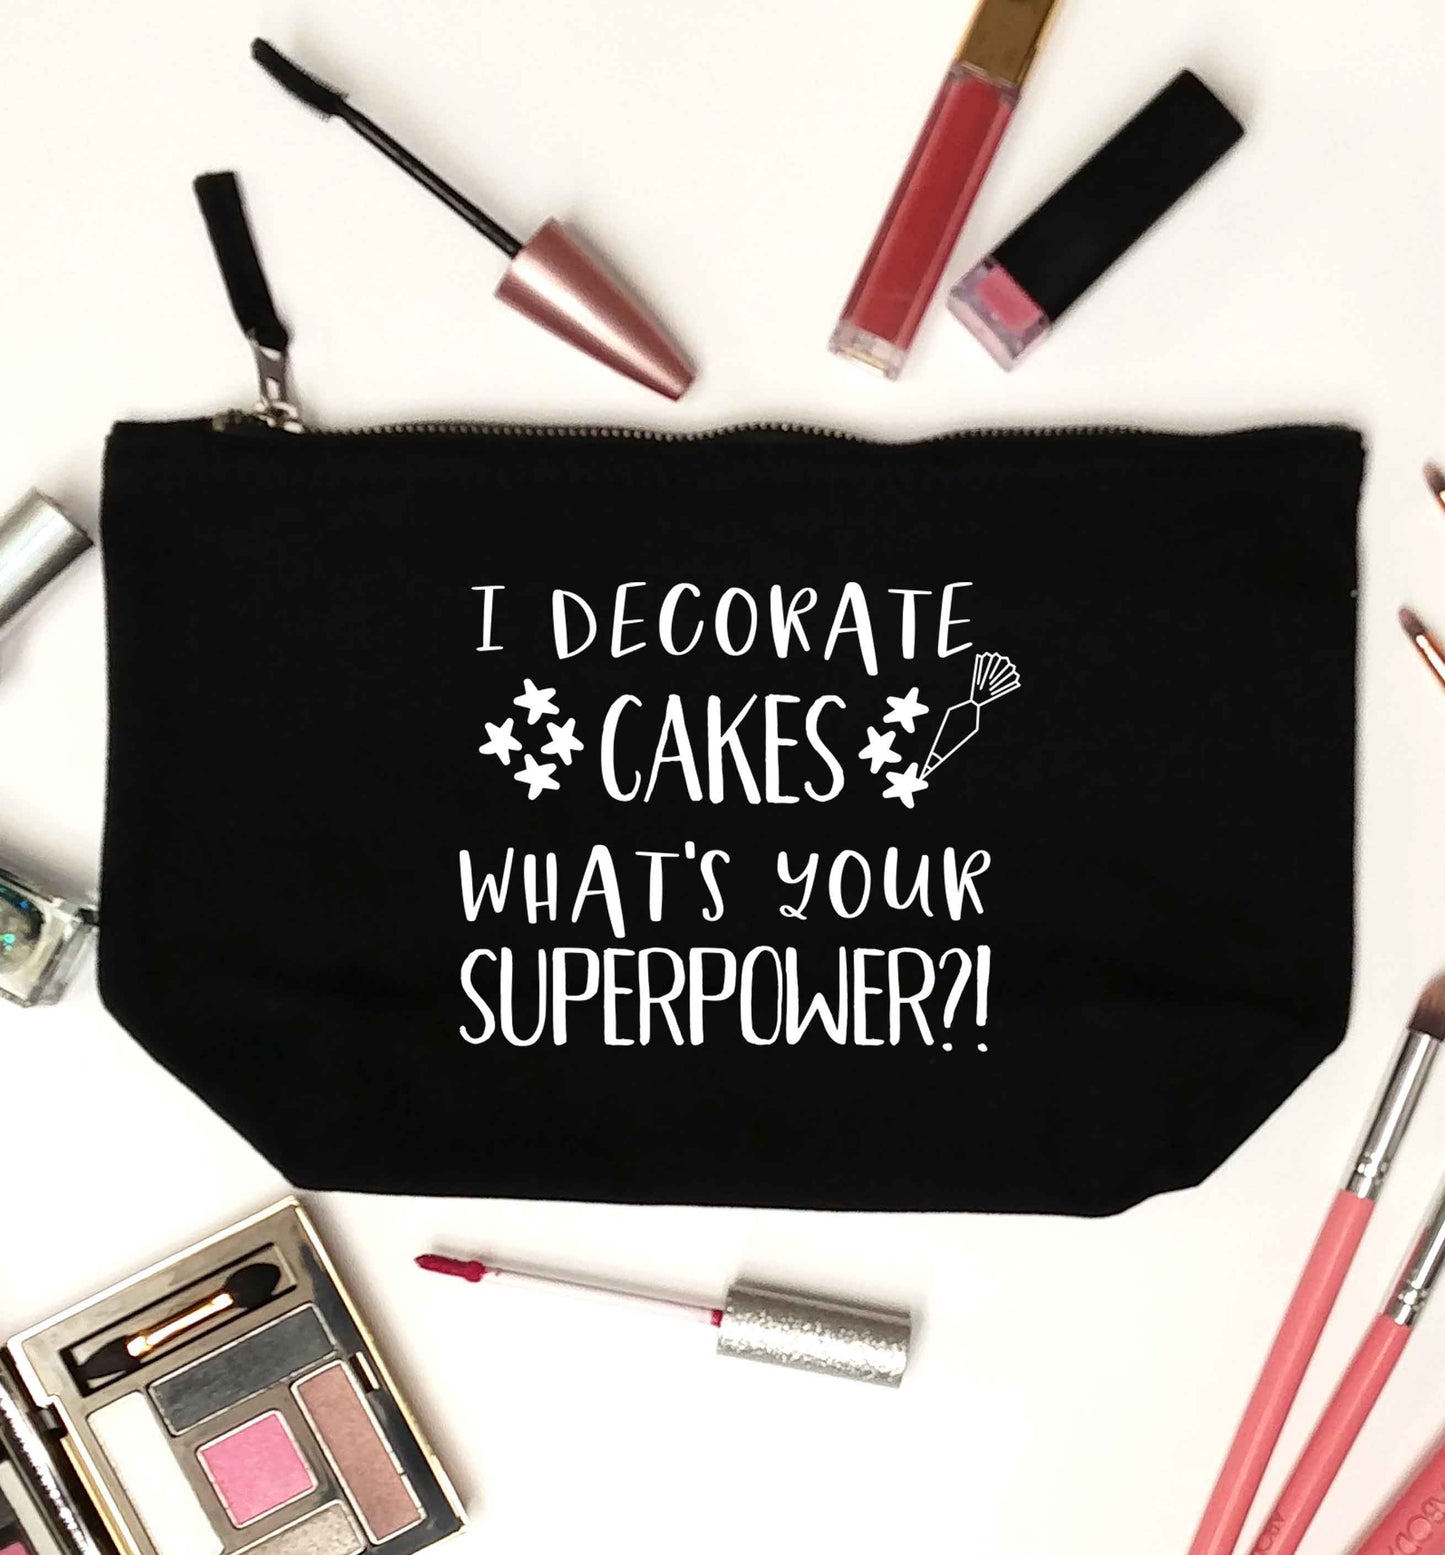 I decorate cakes what's your superpower?! black makeup bag